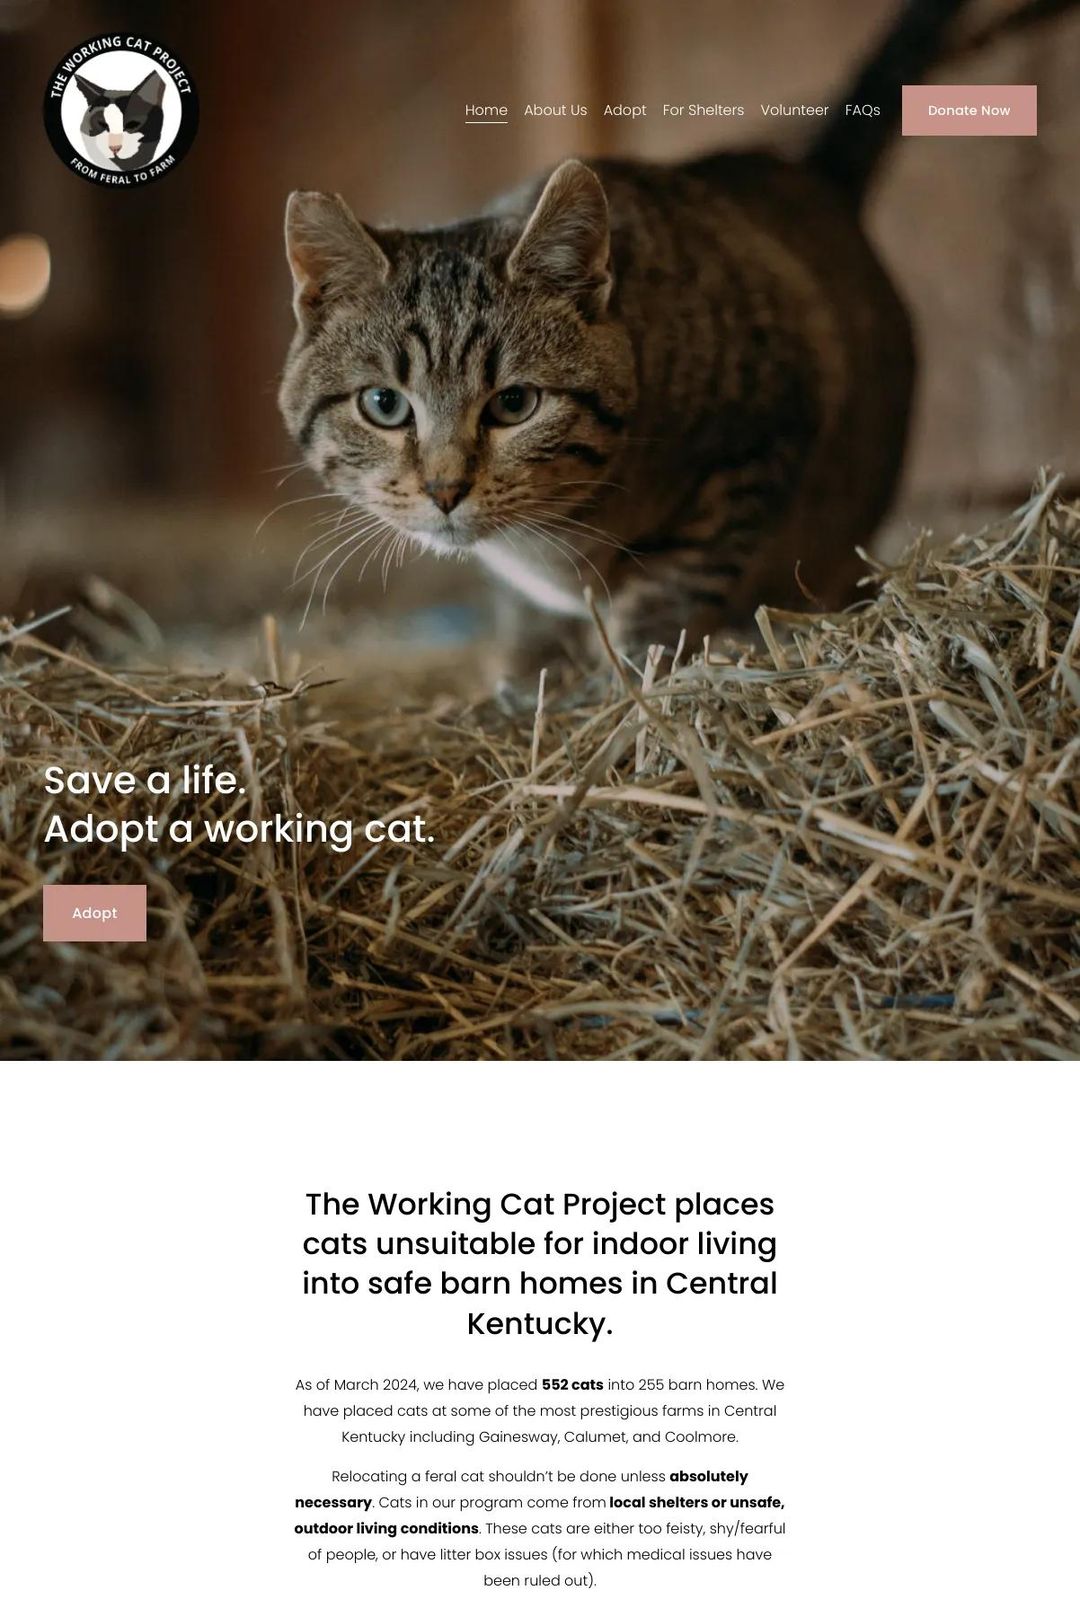 Screenshot 1 of The Working Cat Project (Example Squarespace Nonprofit Website)